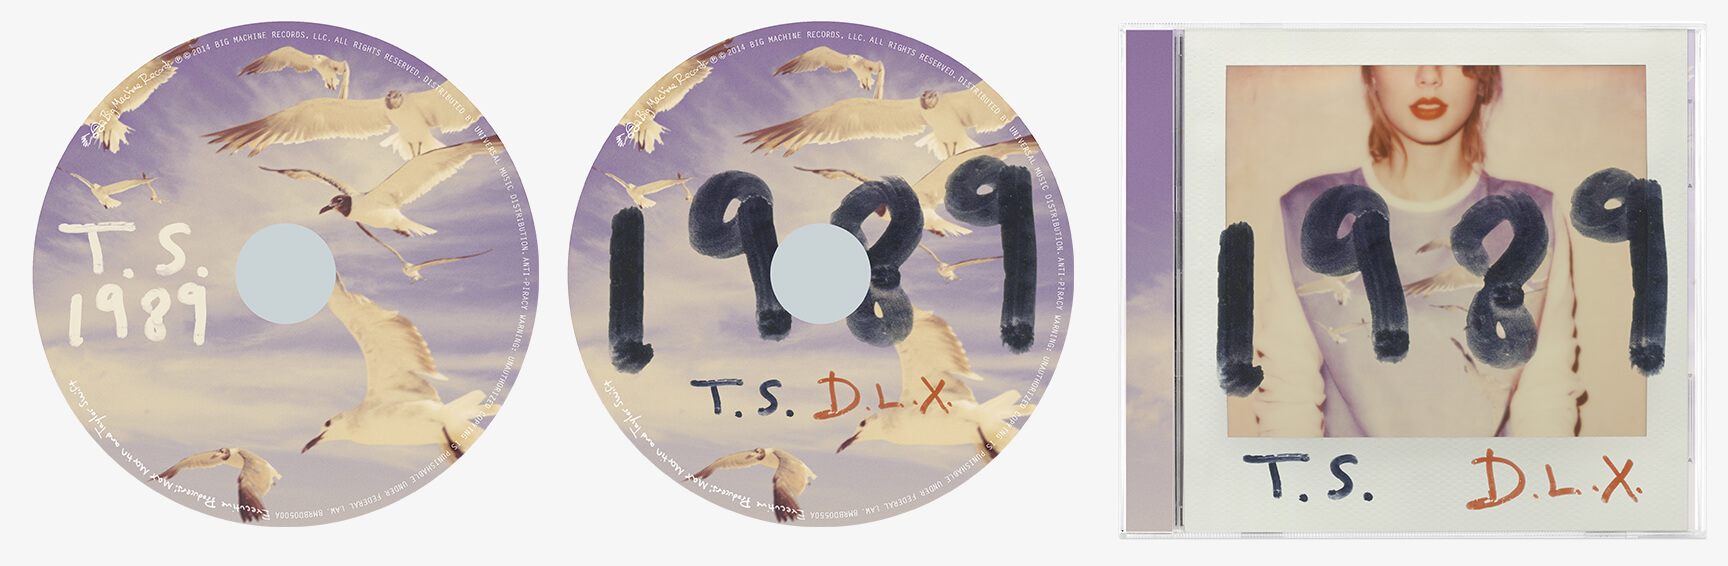 Disk CD covers and deluxe album cover packaging design for Taylor Swift 1989